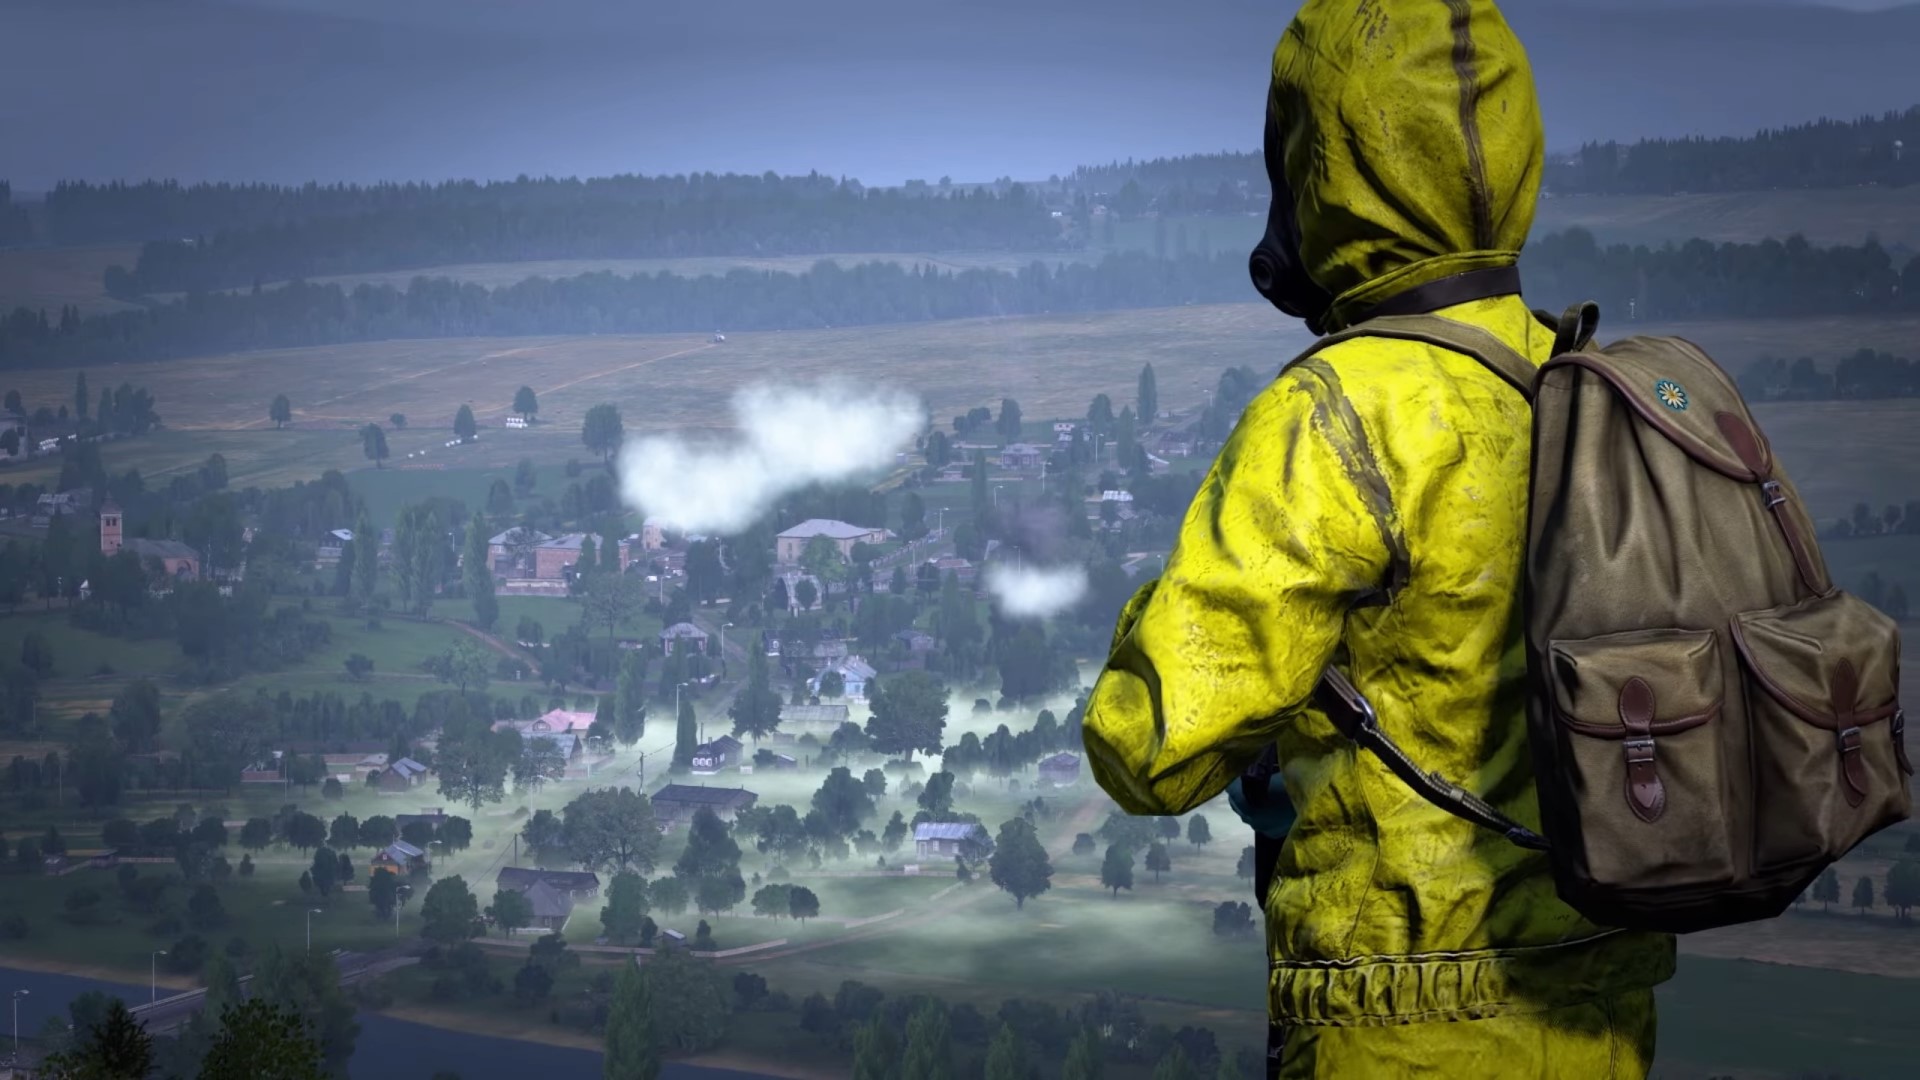 DayZ's latest update adds contaminated zones, so get your hazmat gear ready